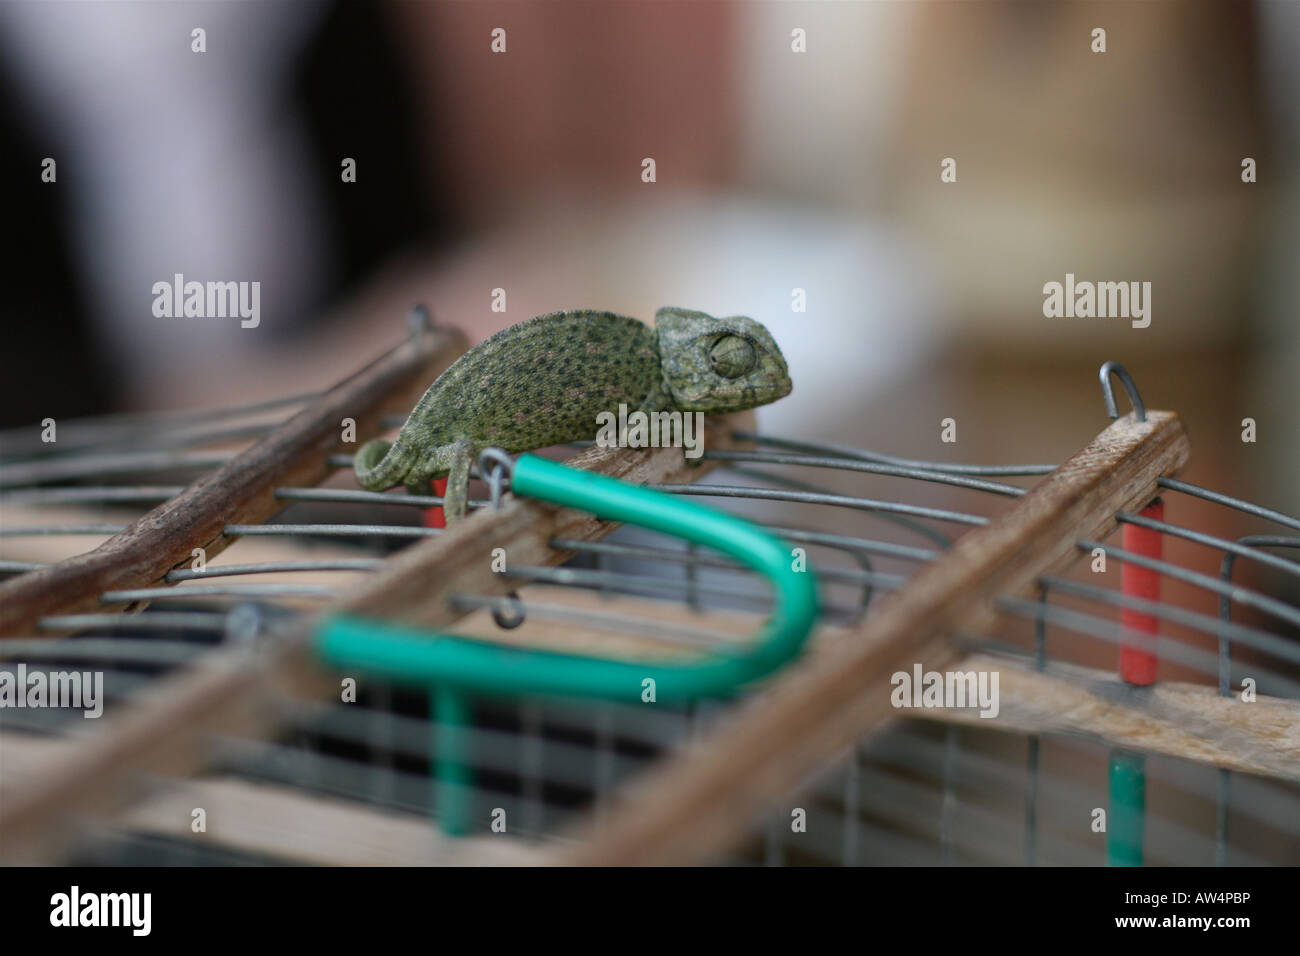 A baby chameleon in the souk, Marrakech, Morocco Stock Photo